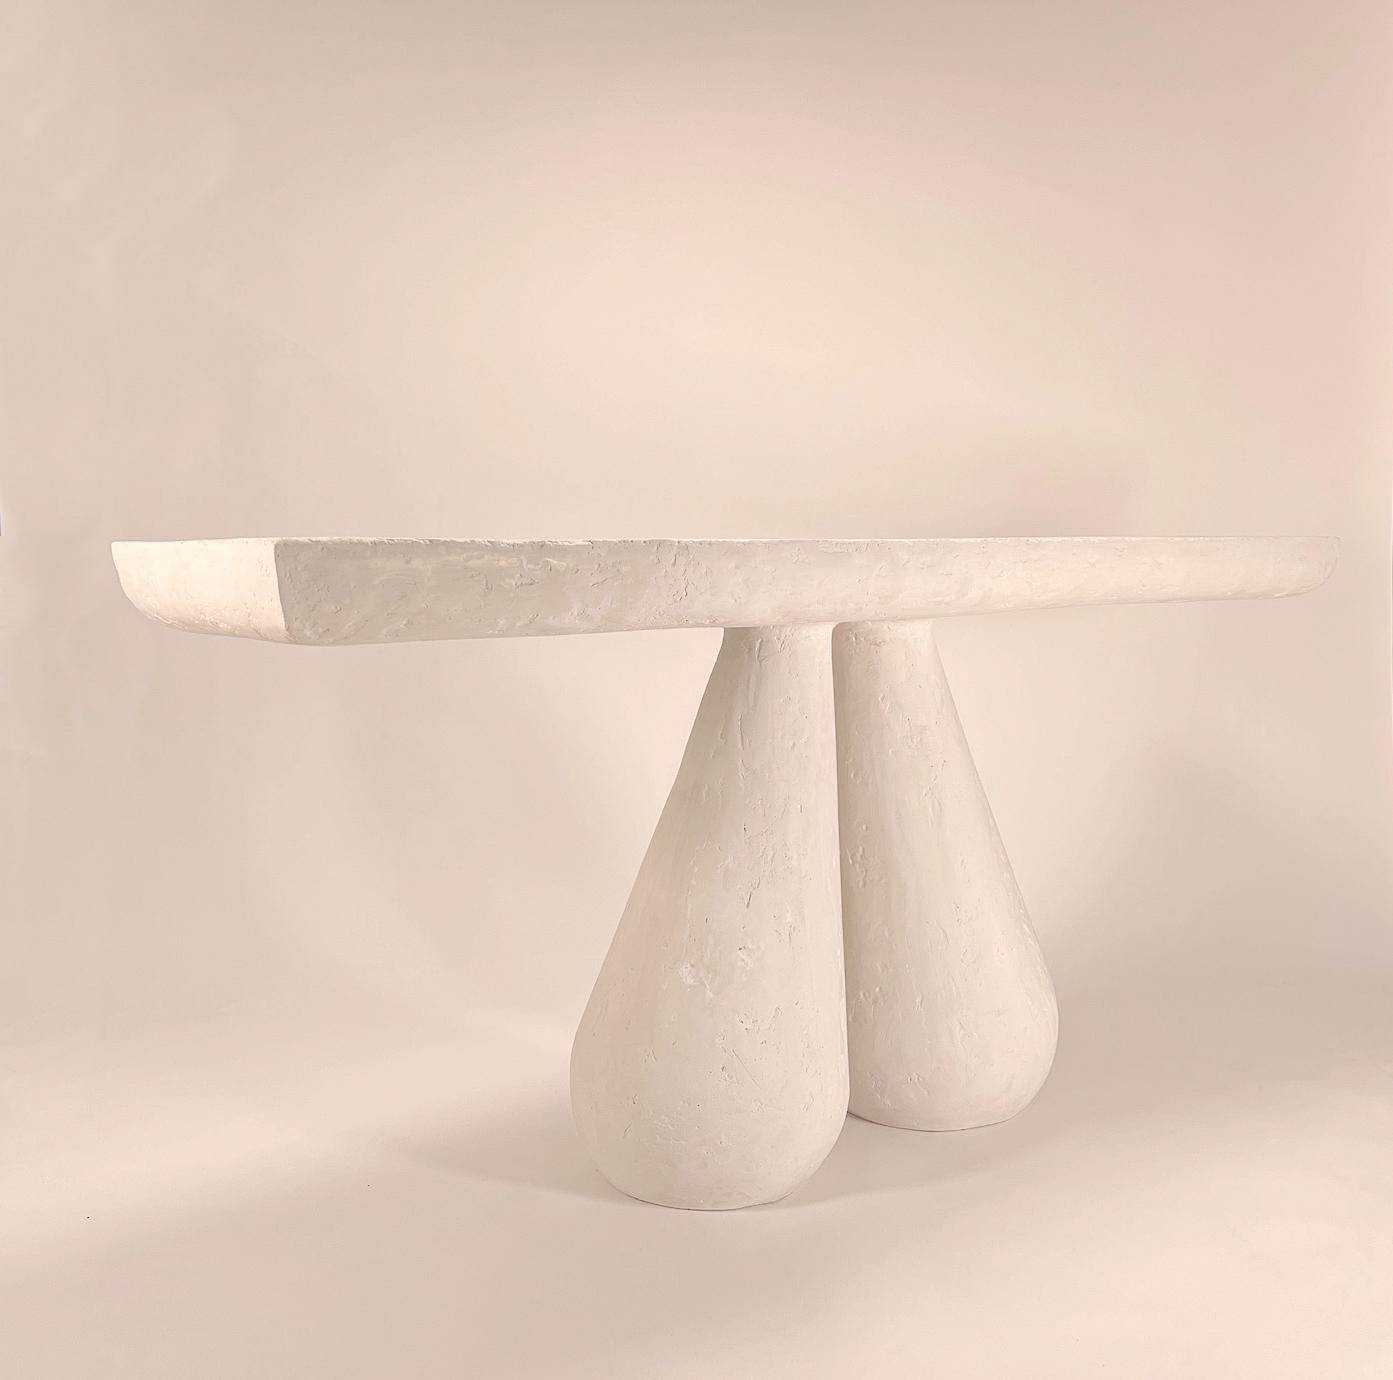 Hand-Crafted Erika Console Table - Contemporary Plaster Table by Artist Gabriel Anderson